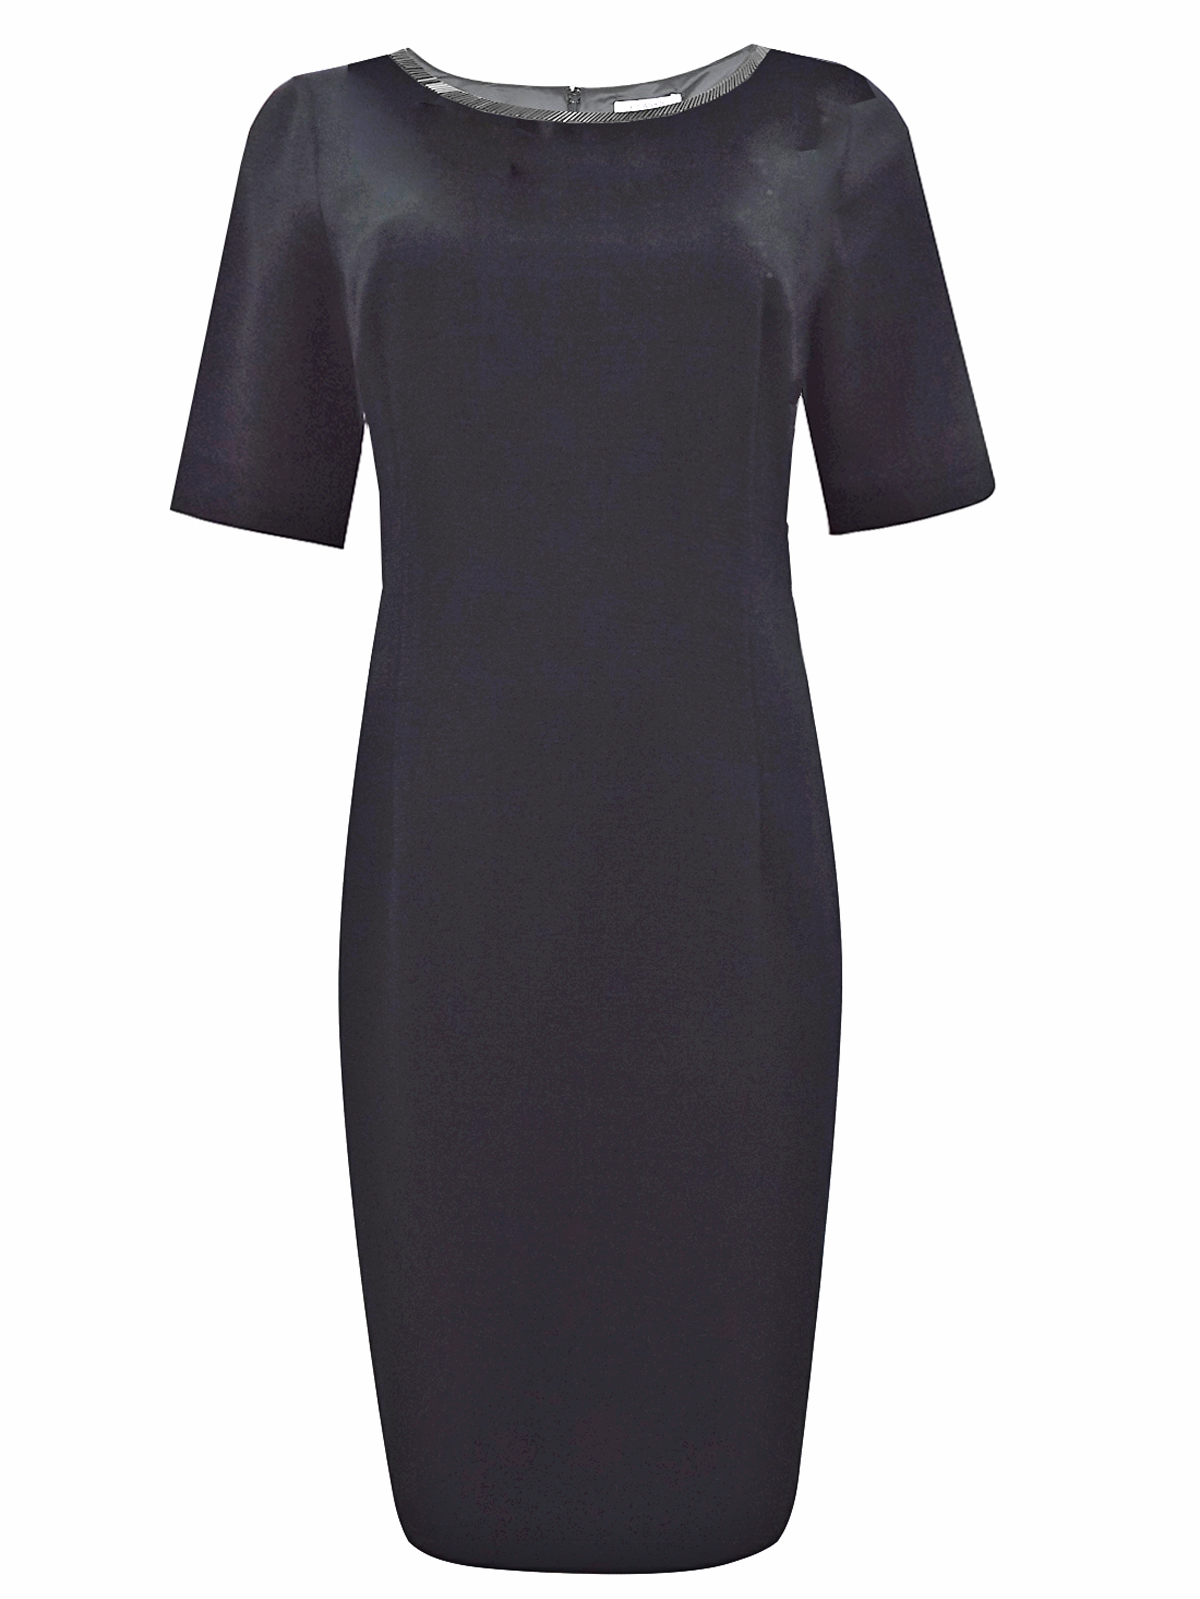 Marks and Spencer - - M&5 BLACK Beaded Scoop Neck Textured Shift Dress